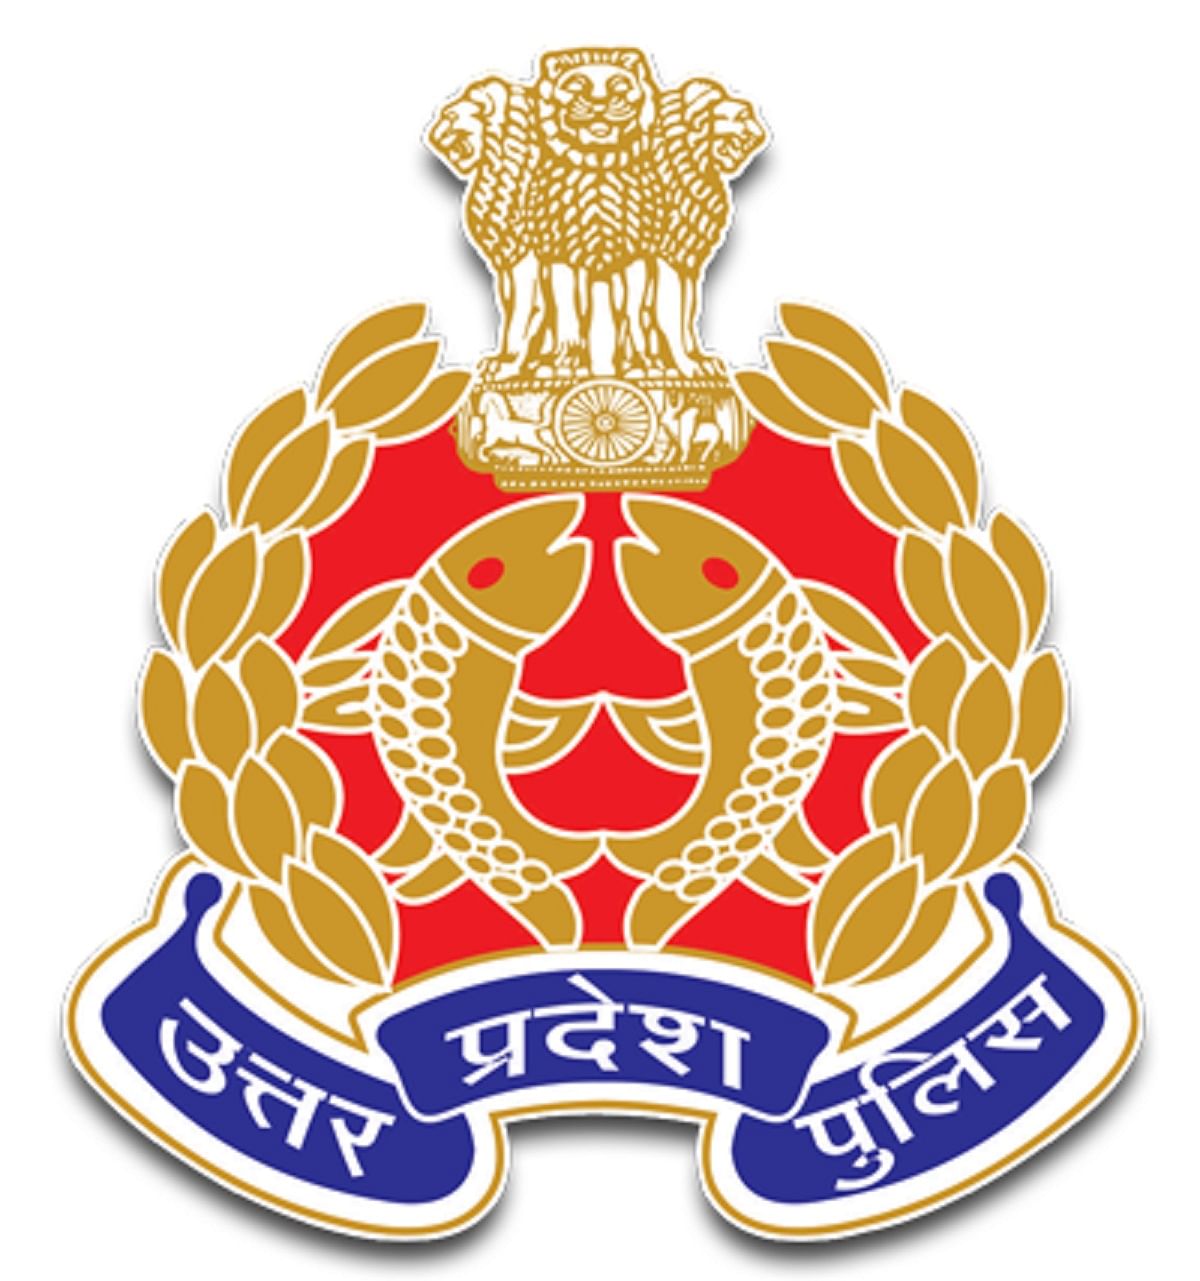 UP Police SI Recruitment 2021 for Graduates and BSc Pass Candidates, Application Process to Begin in April